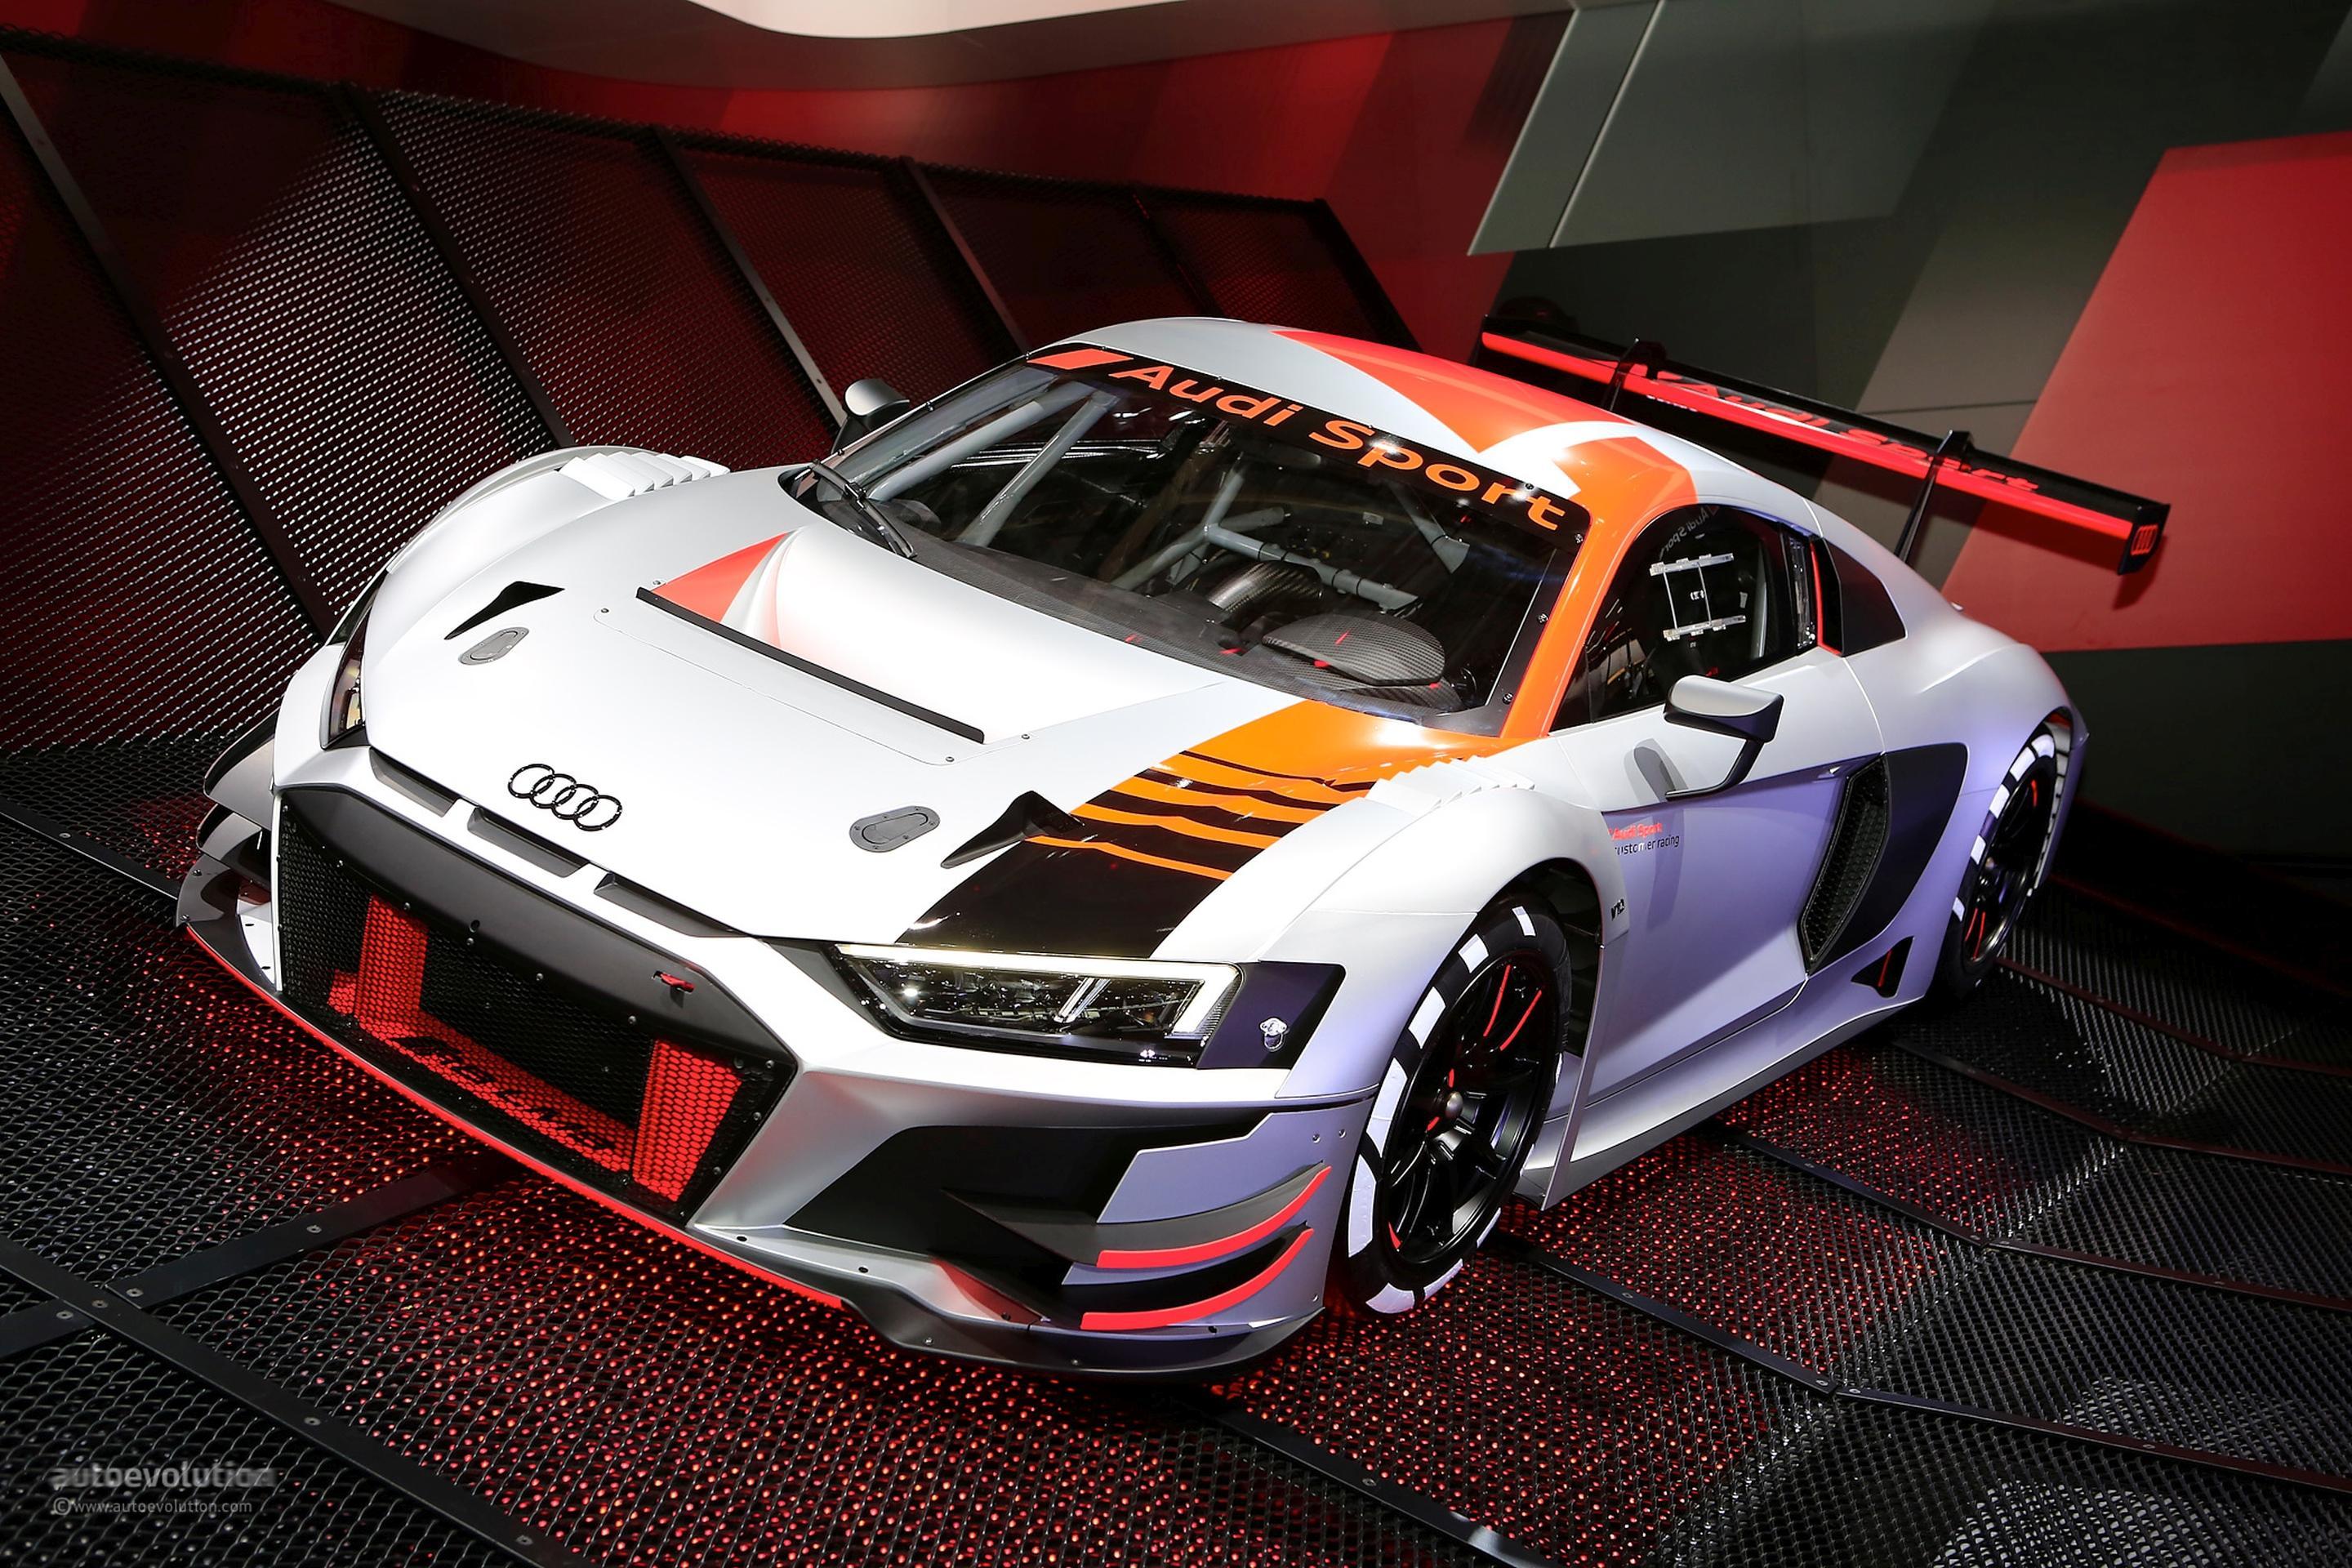 Audi R8 LMS GT3 Racecar Costs $ But You Can